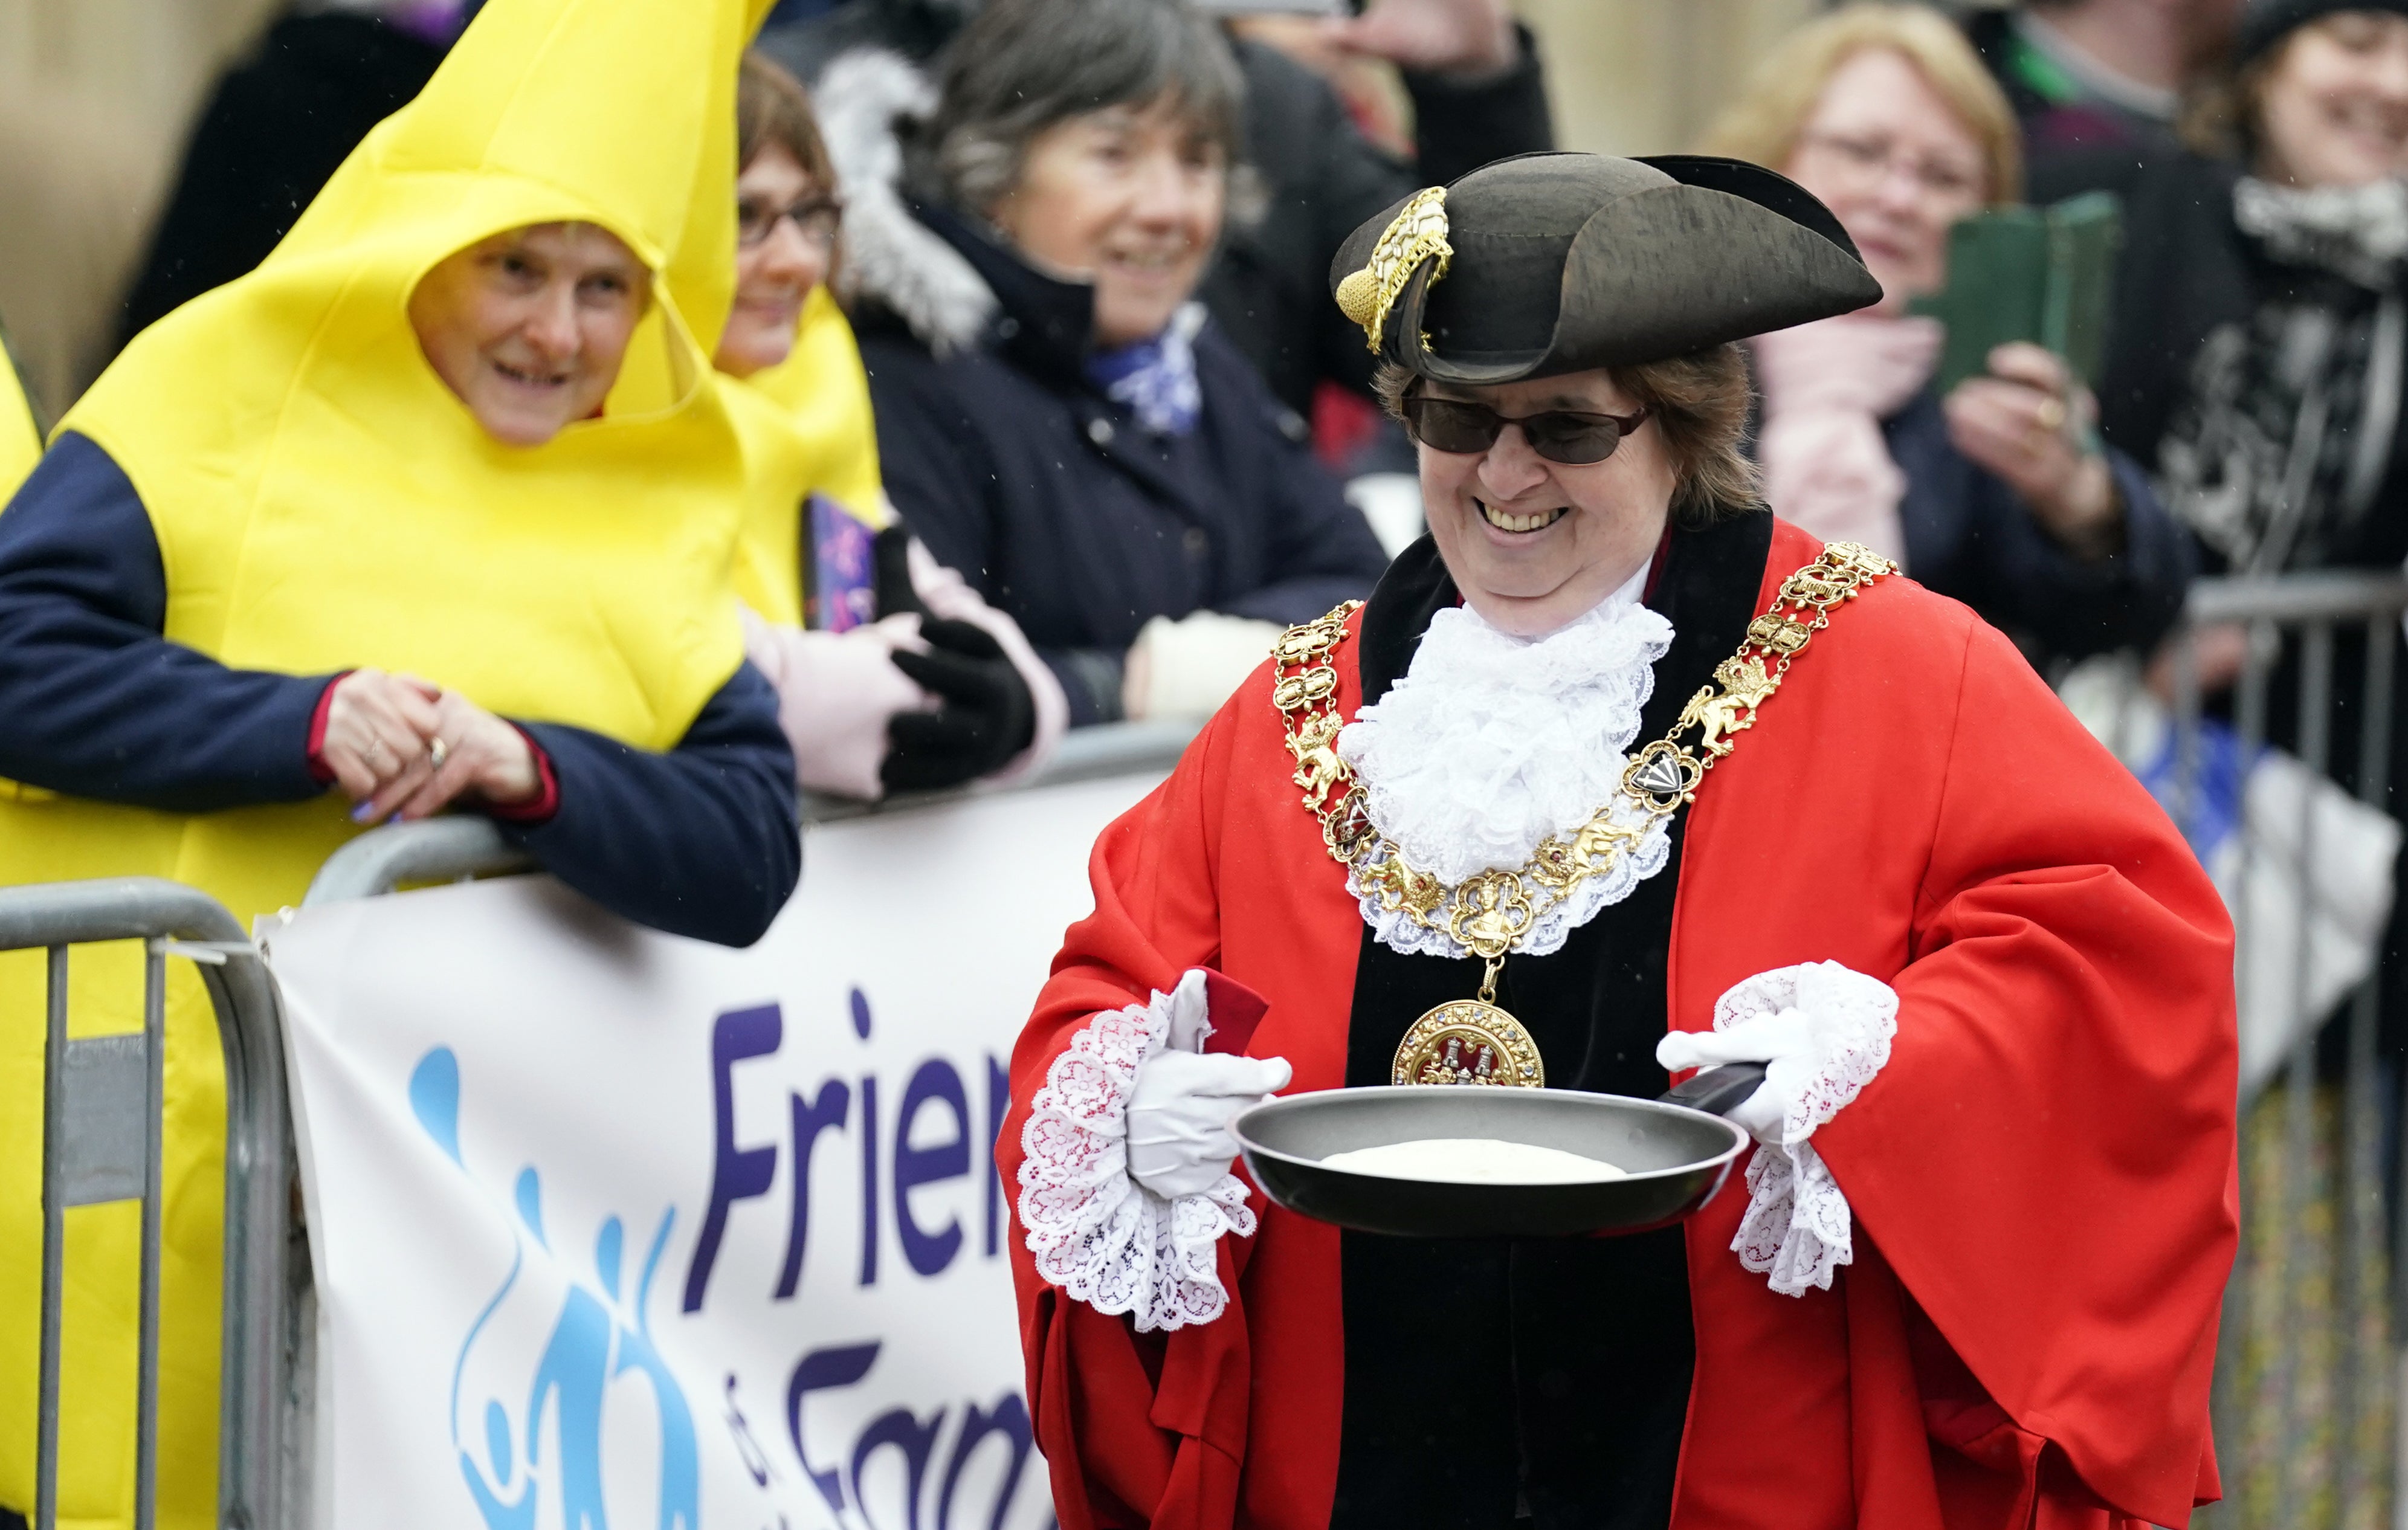 The mayor of Winchester, councillor Vivian Achwal, takes part in the Shrove Tuesday pancake race at Winchester Cathedral (Andrew Matthews/PA)